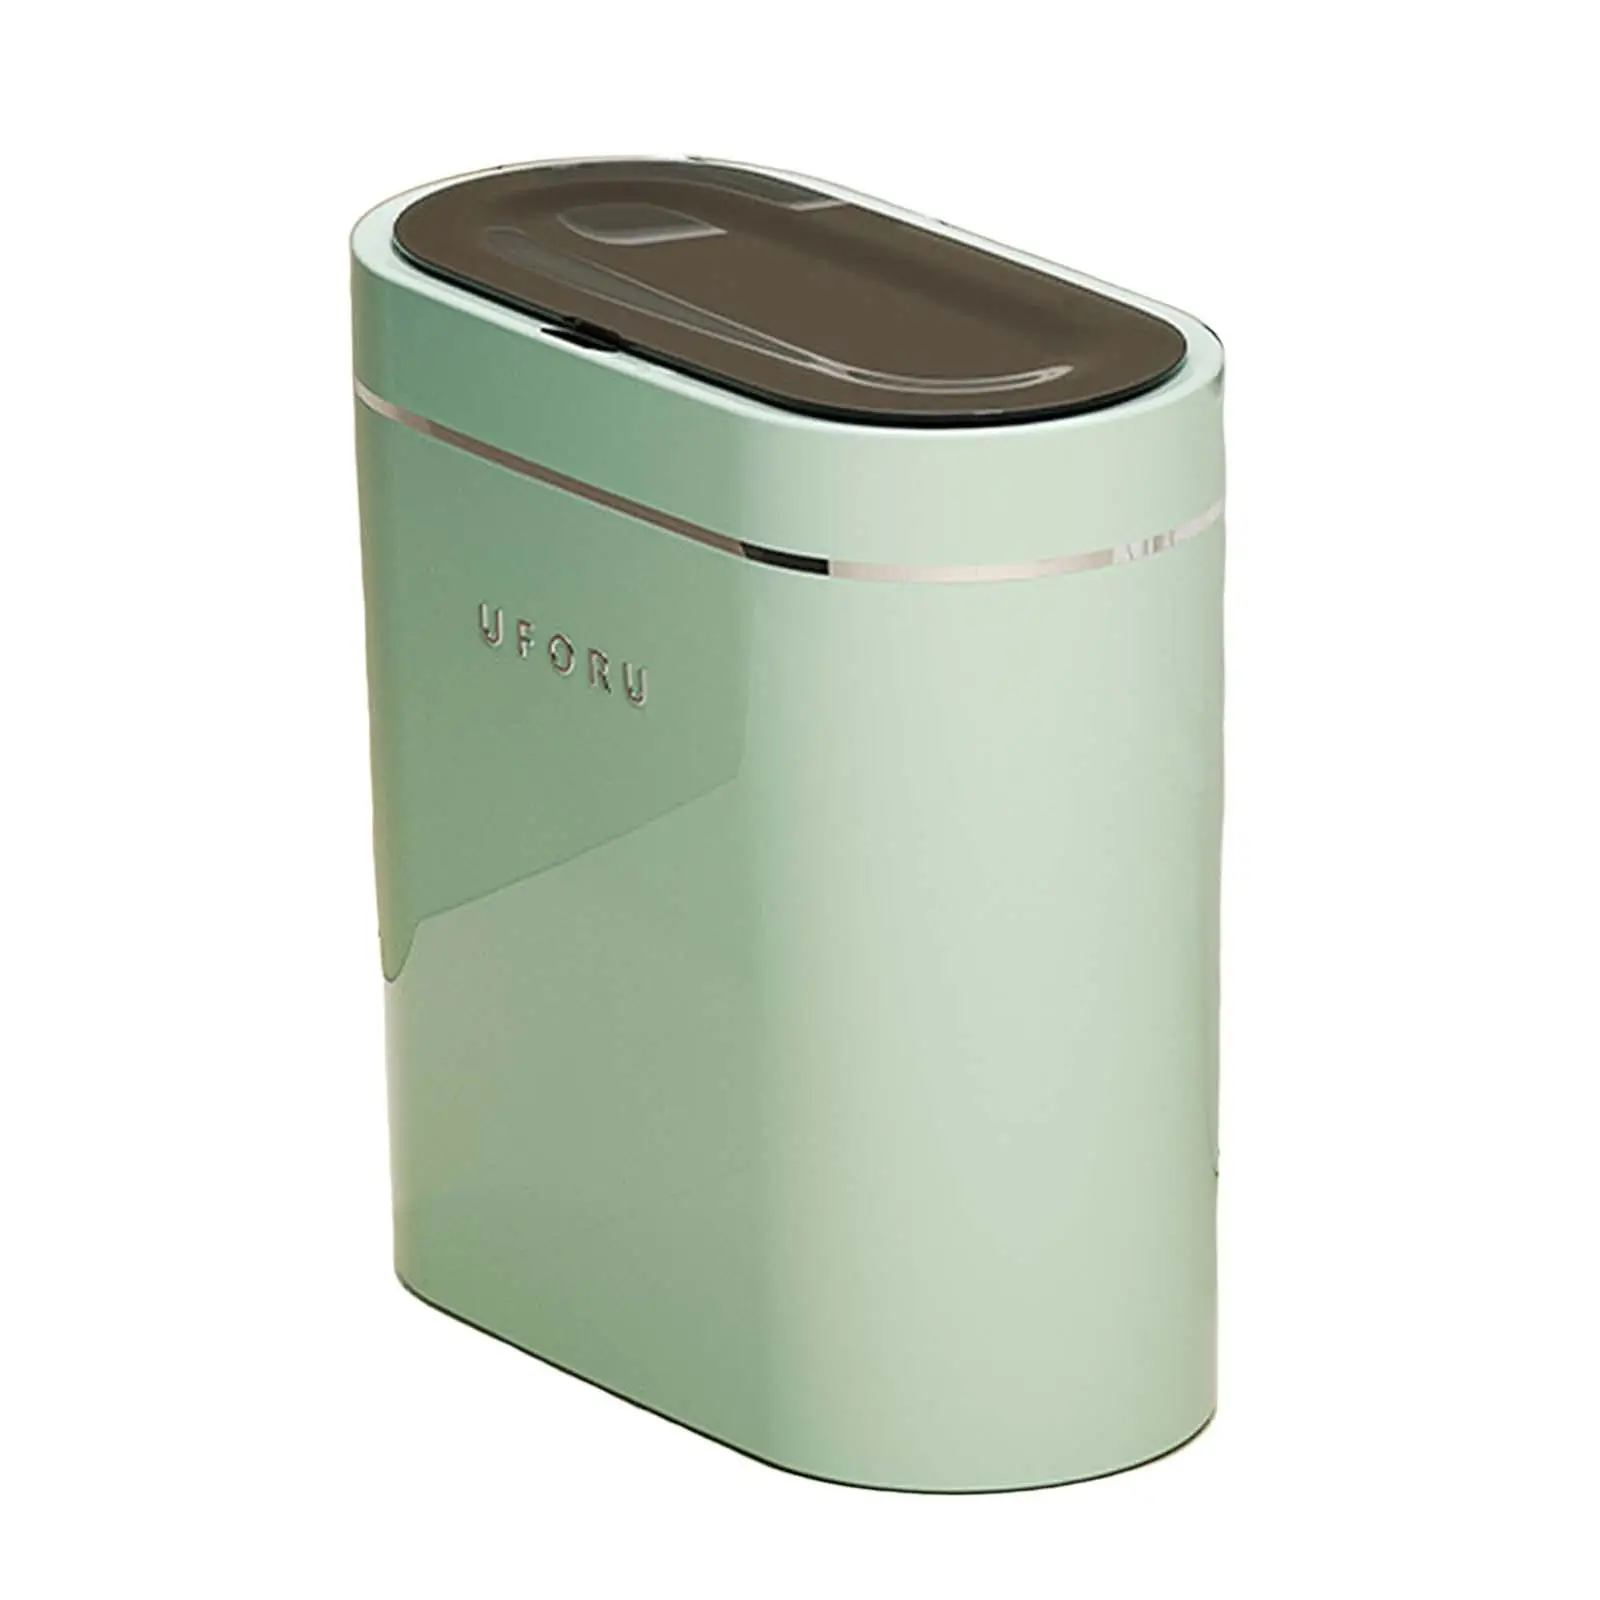 Intelligent Induction Trash Bins Space Saving Smart Trash Can Automatic Motion Sensor Garbage Can for Laundry Office Living Room